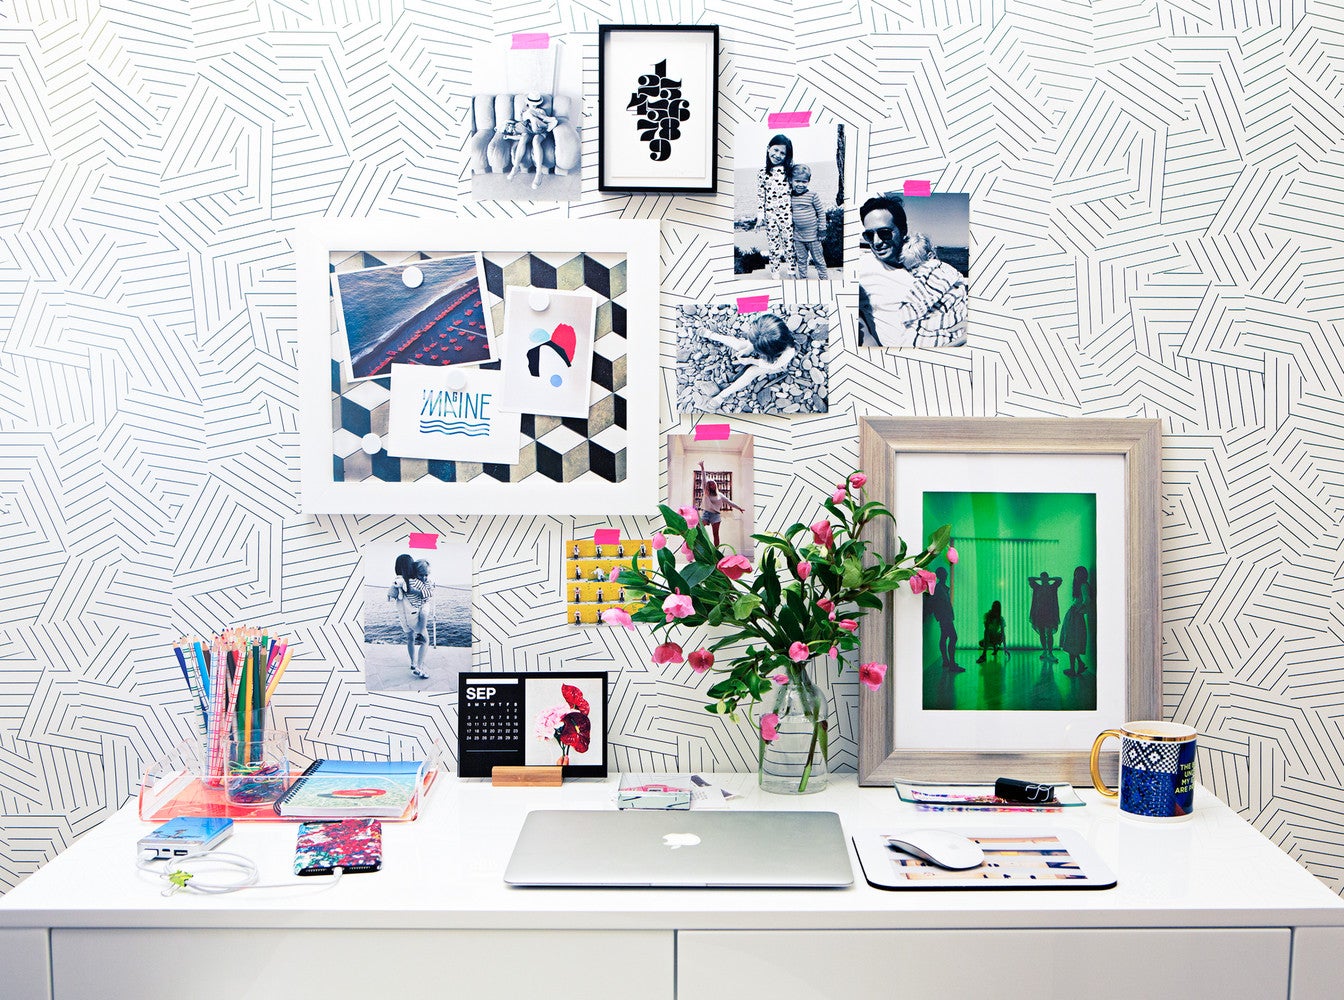 How I Revamped My Office and Made Work More Fun With Personalized Accessories From Shutterfly